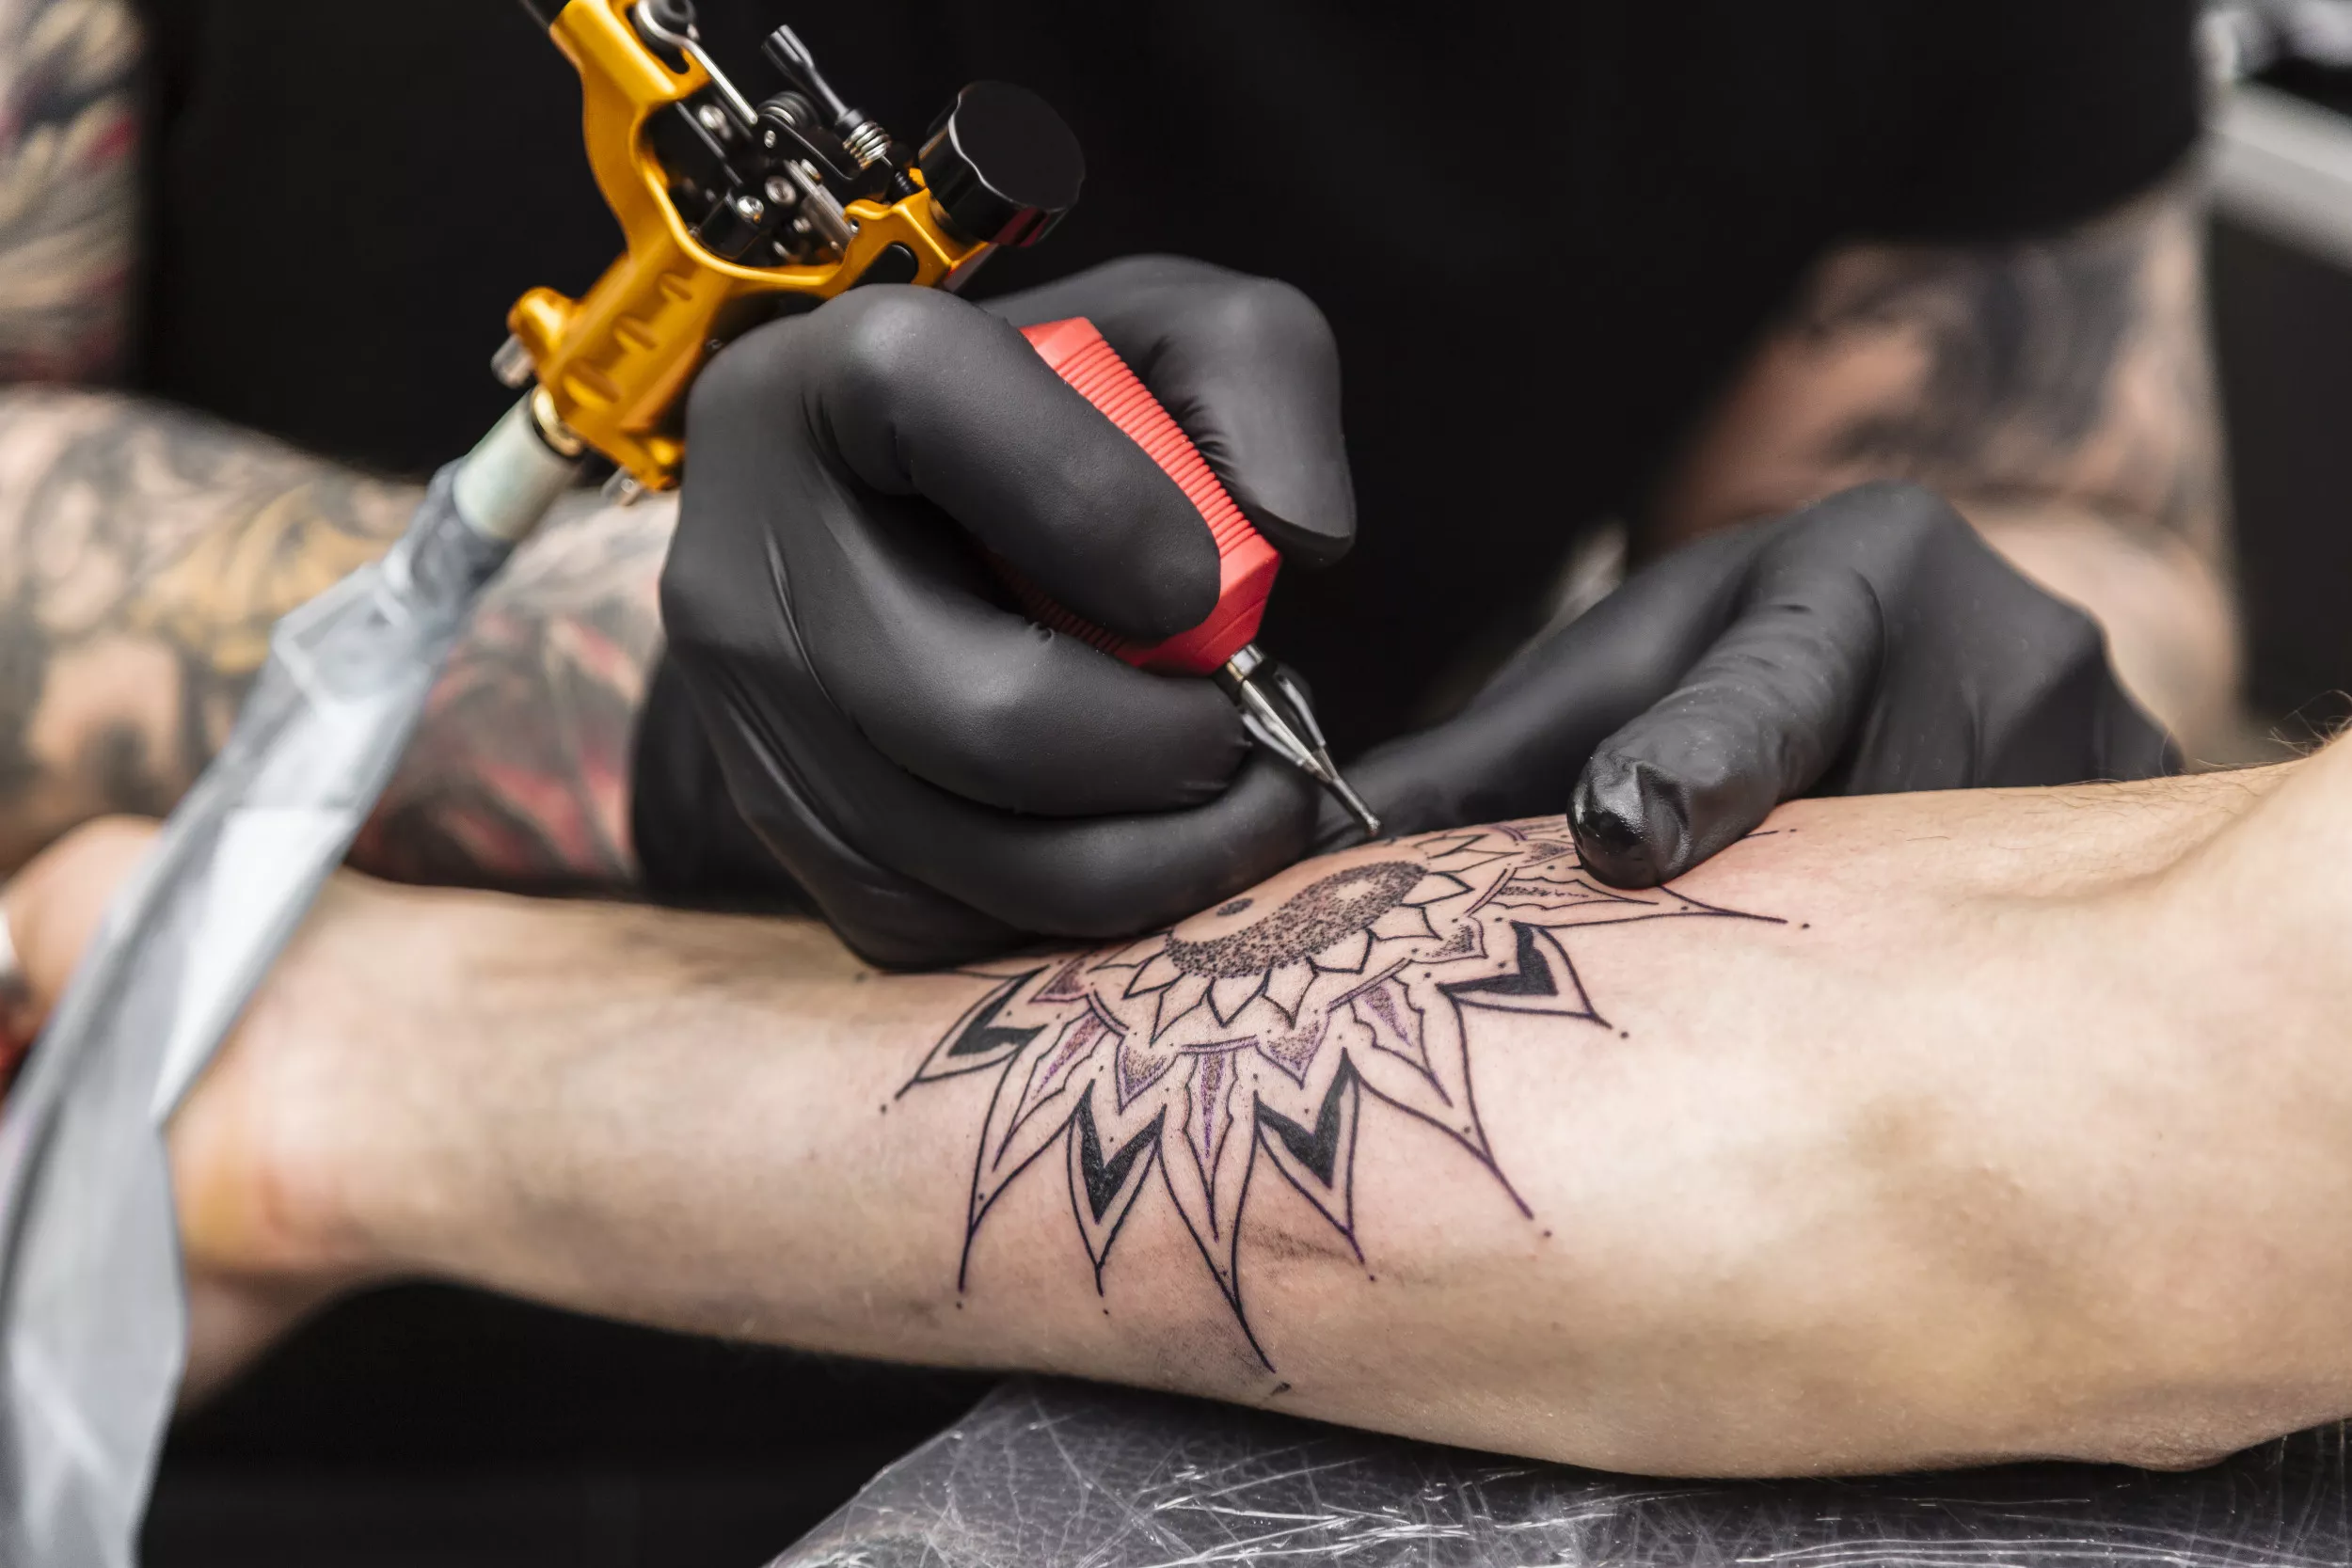 New DC tattoo studio features ink that eventually disappears  WTOP News